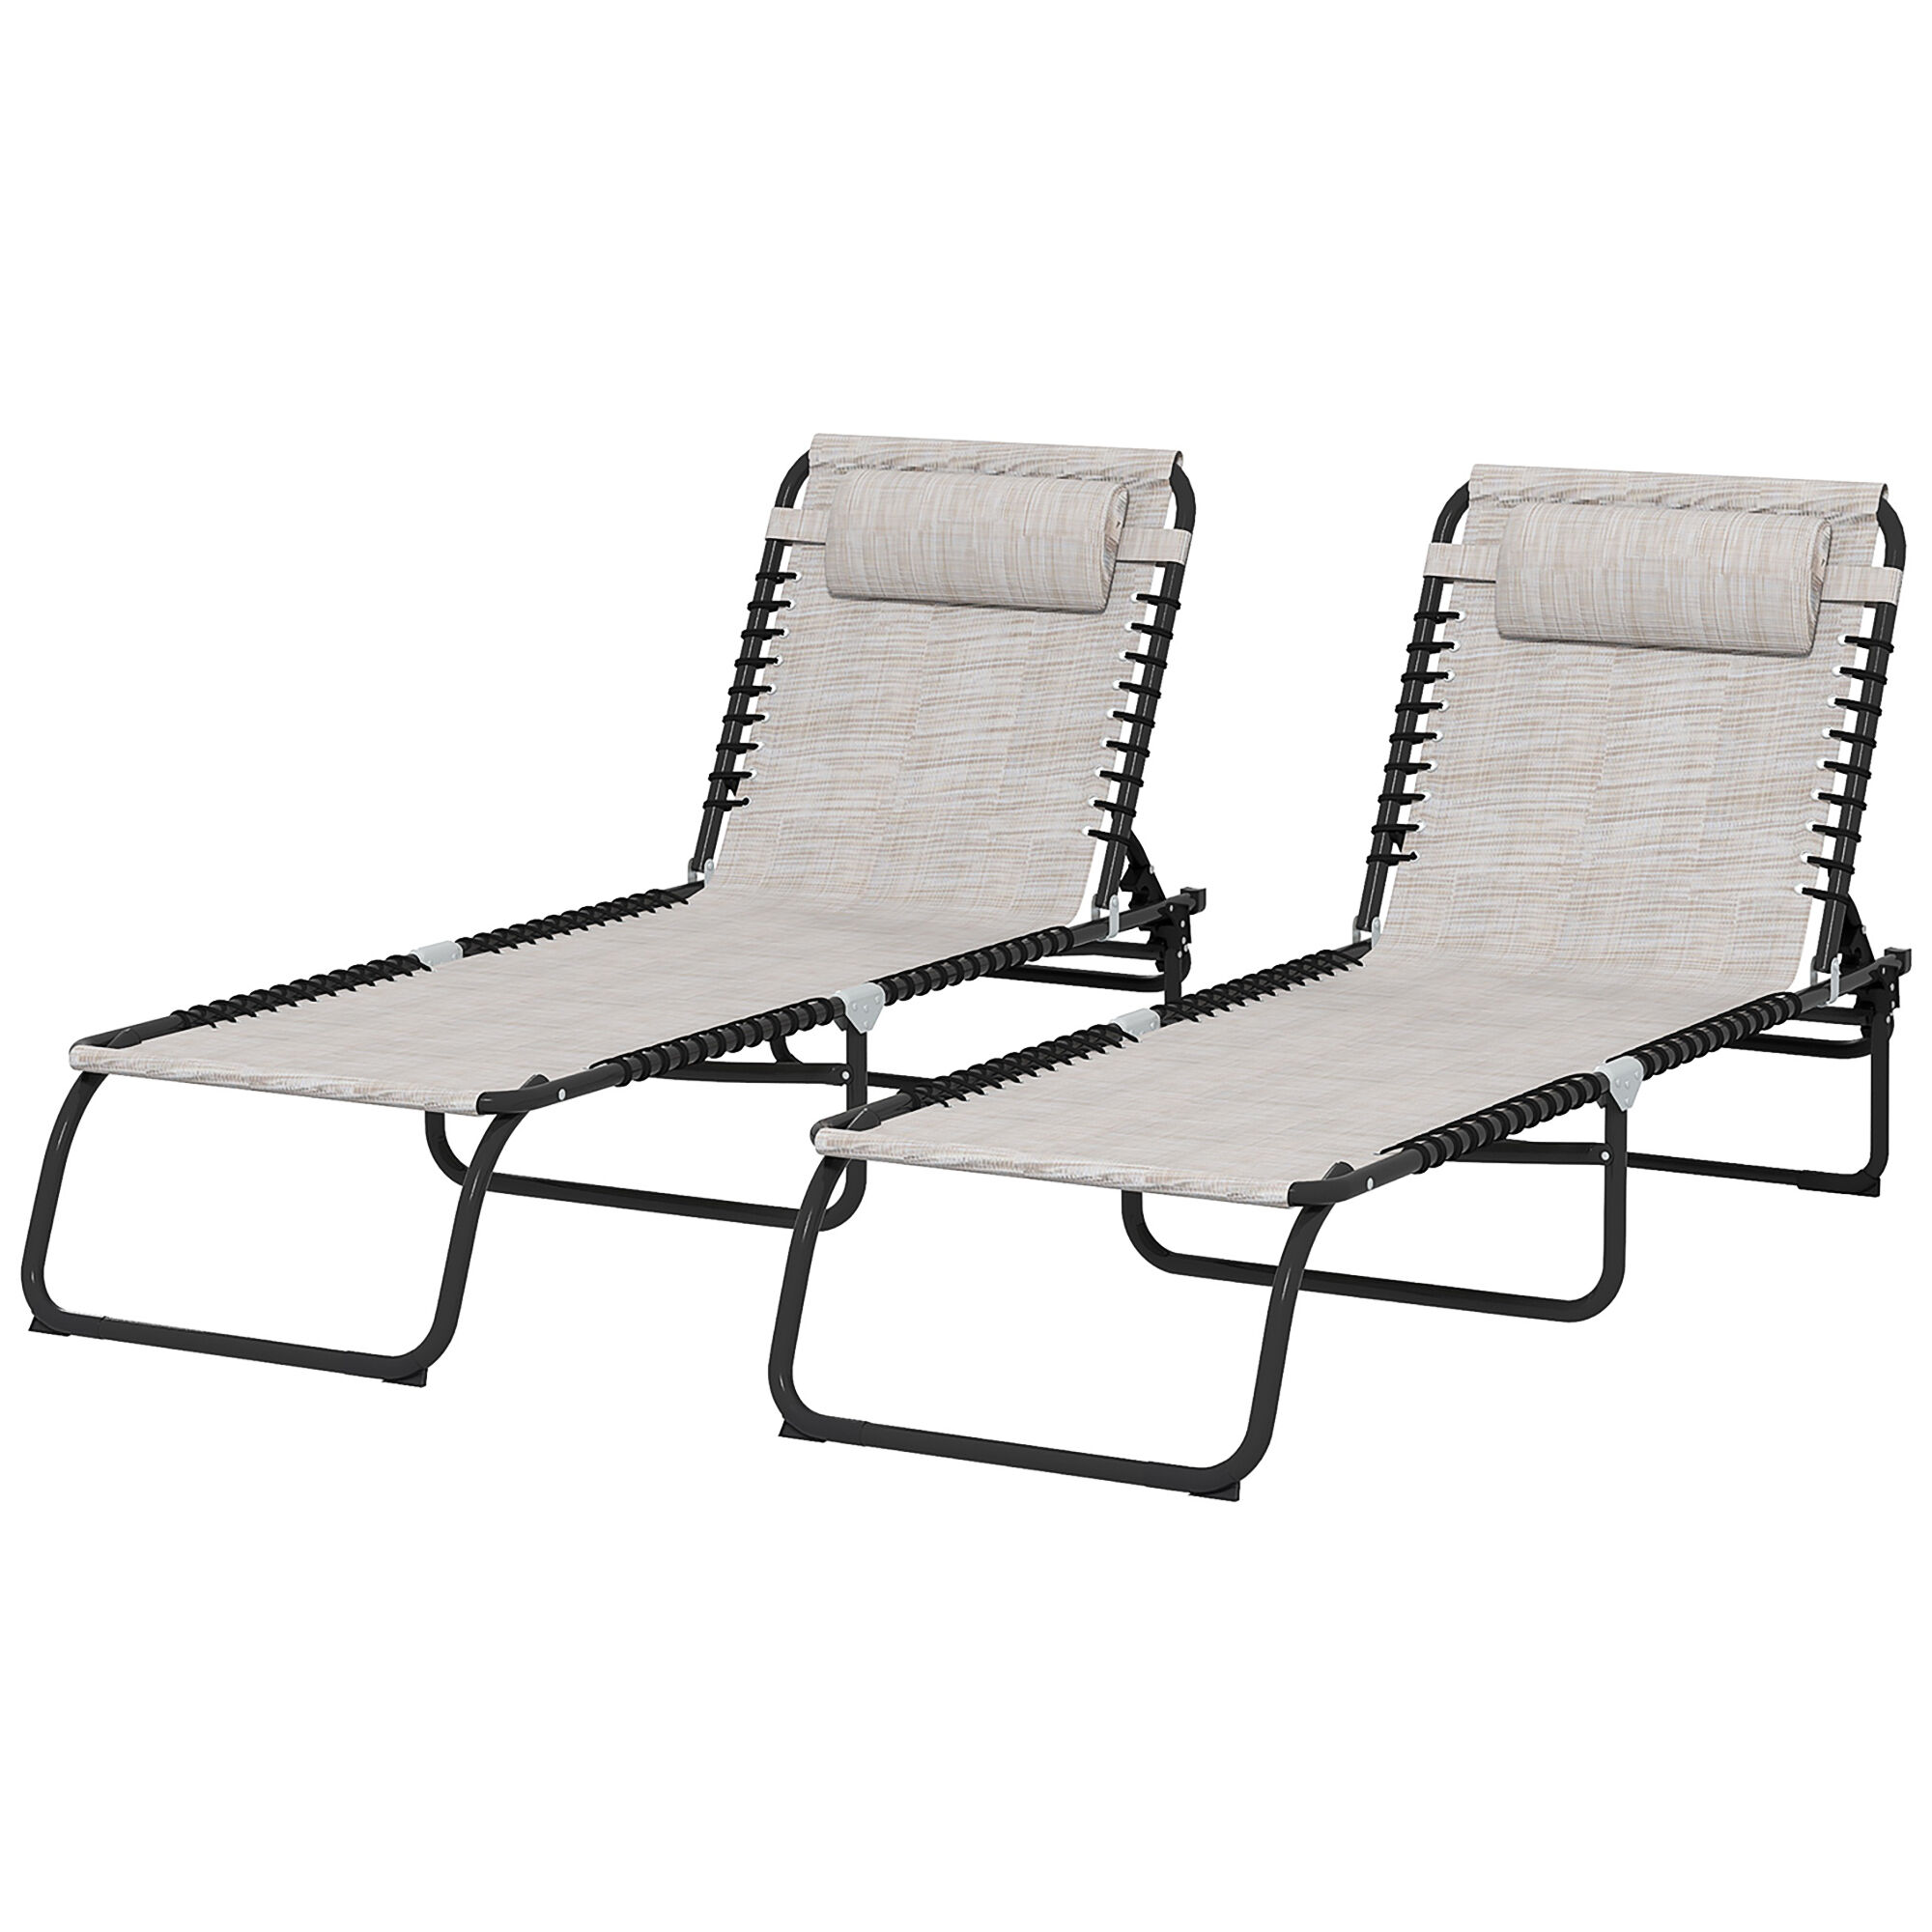 Outsunny 2 Pieces of 4-Position Reclining Beach Chair Chaise Lounge Folding Chair - Cream White